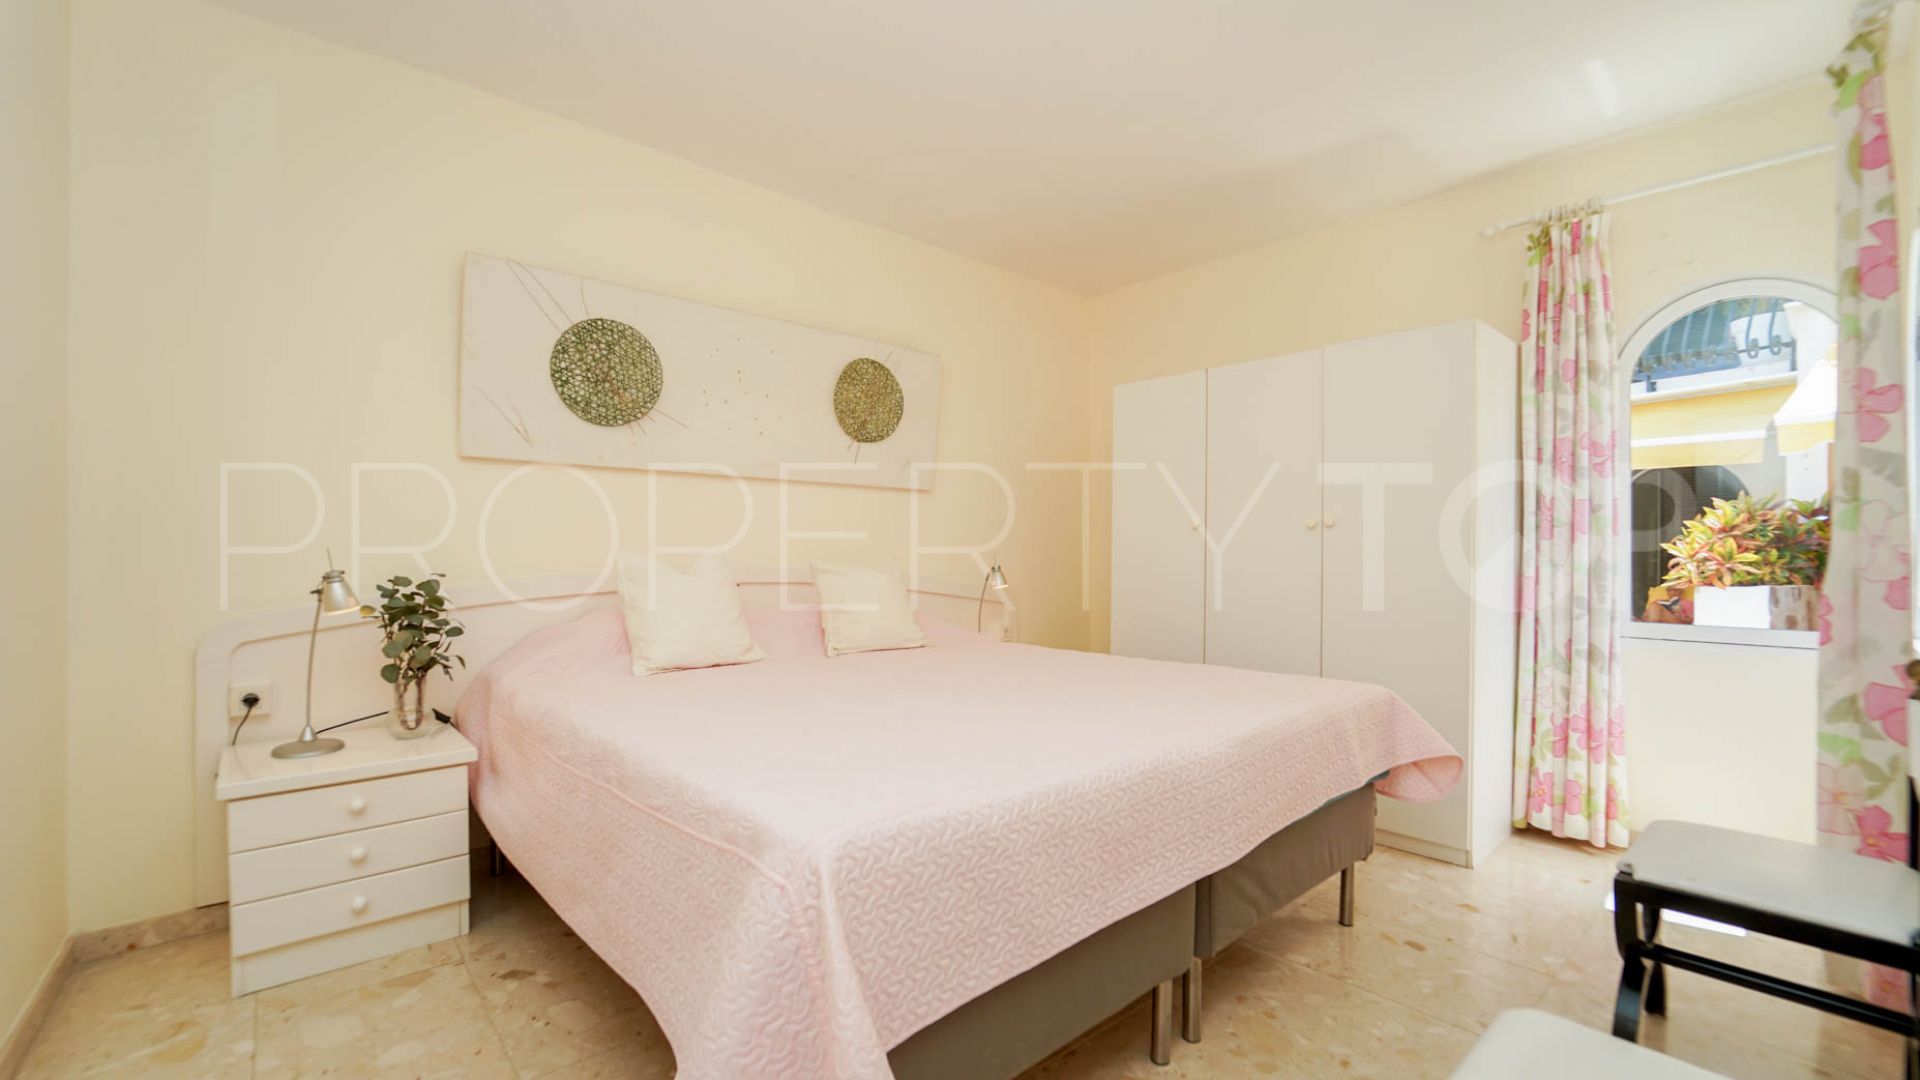 For sale Patalavaca 1 bedroom apartment